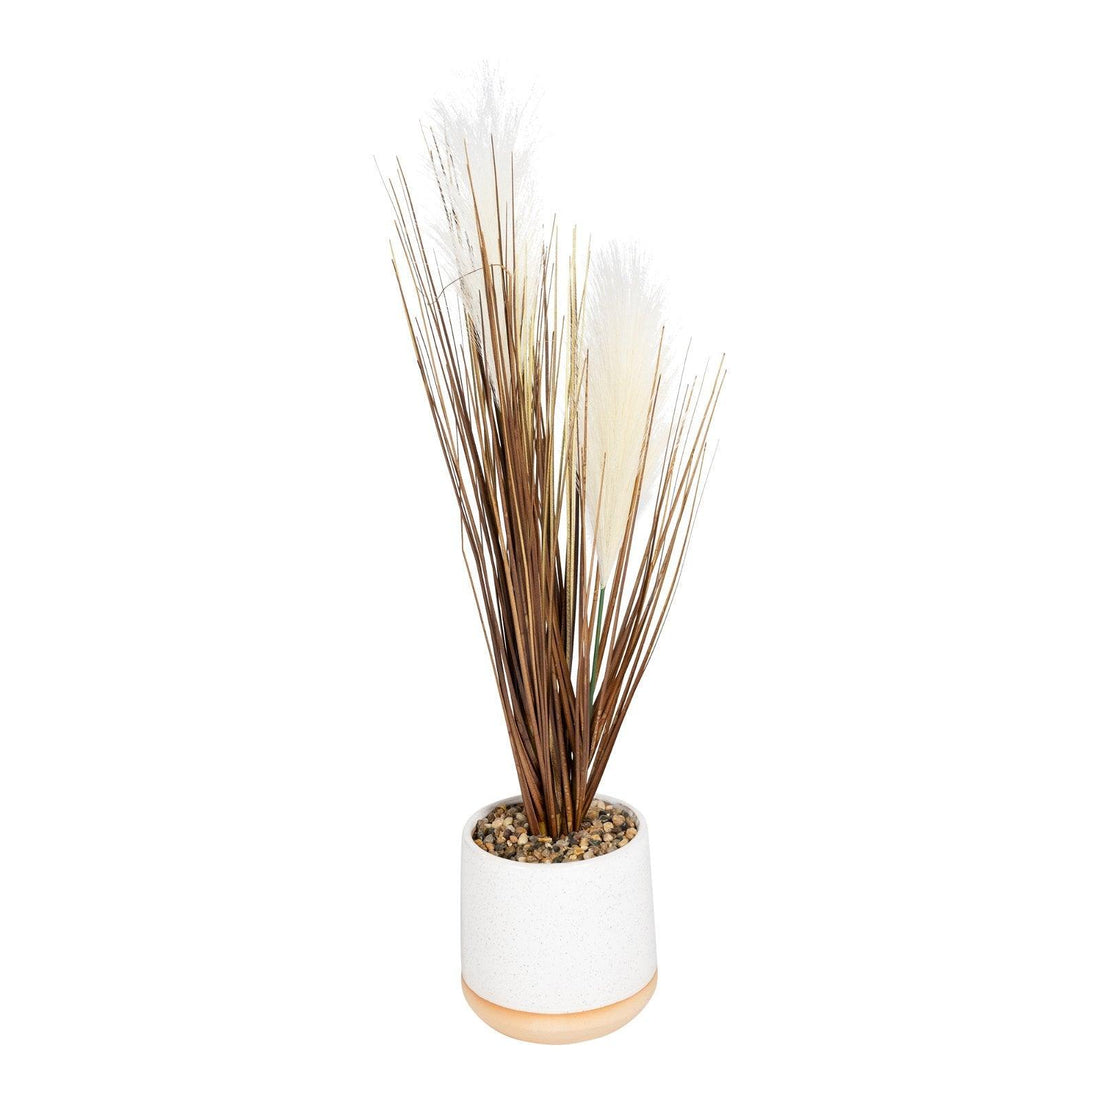 Artificial Grasses In A White Pot With White Feathers - 50cm - £20.99 - Artificial Plants 